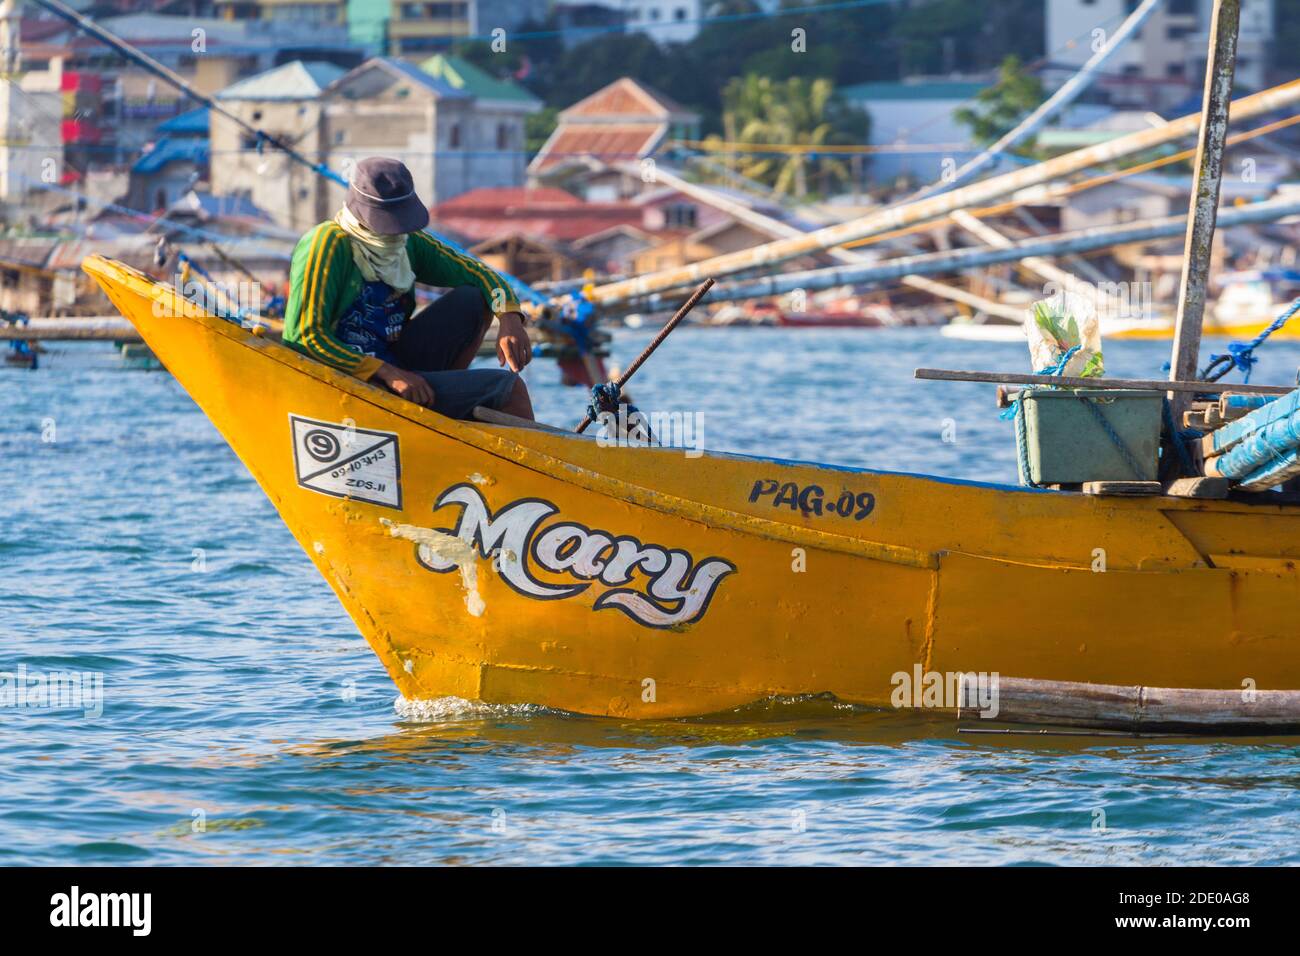 A fishing boat plying the waters off Pagadian City, Philippines Stock Photo